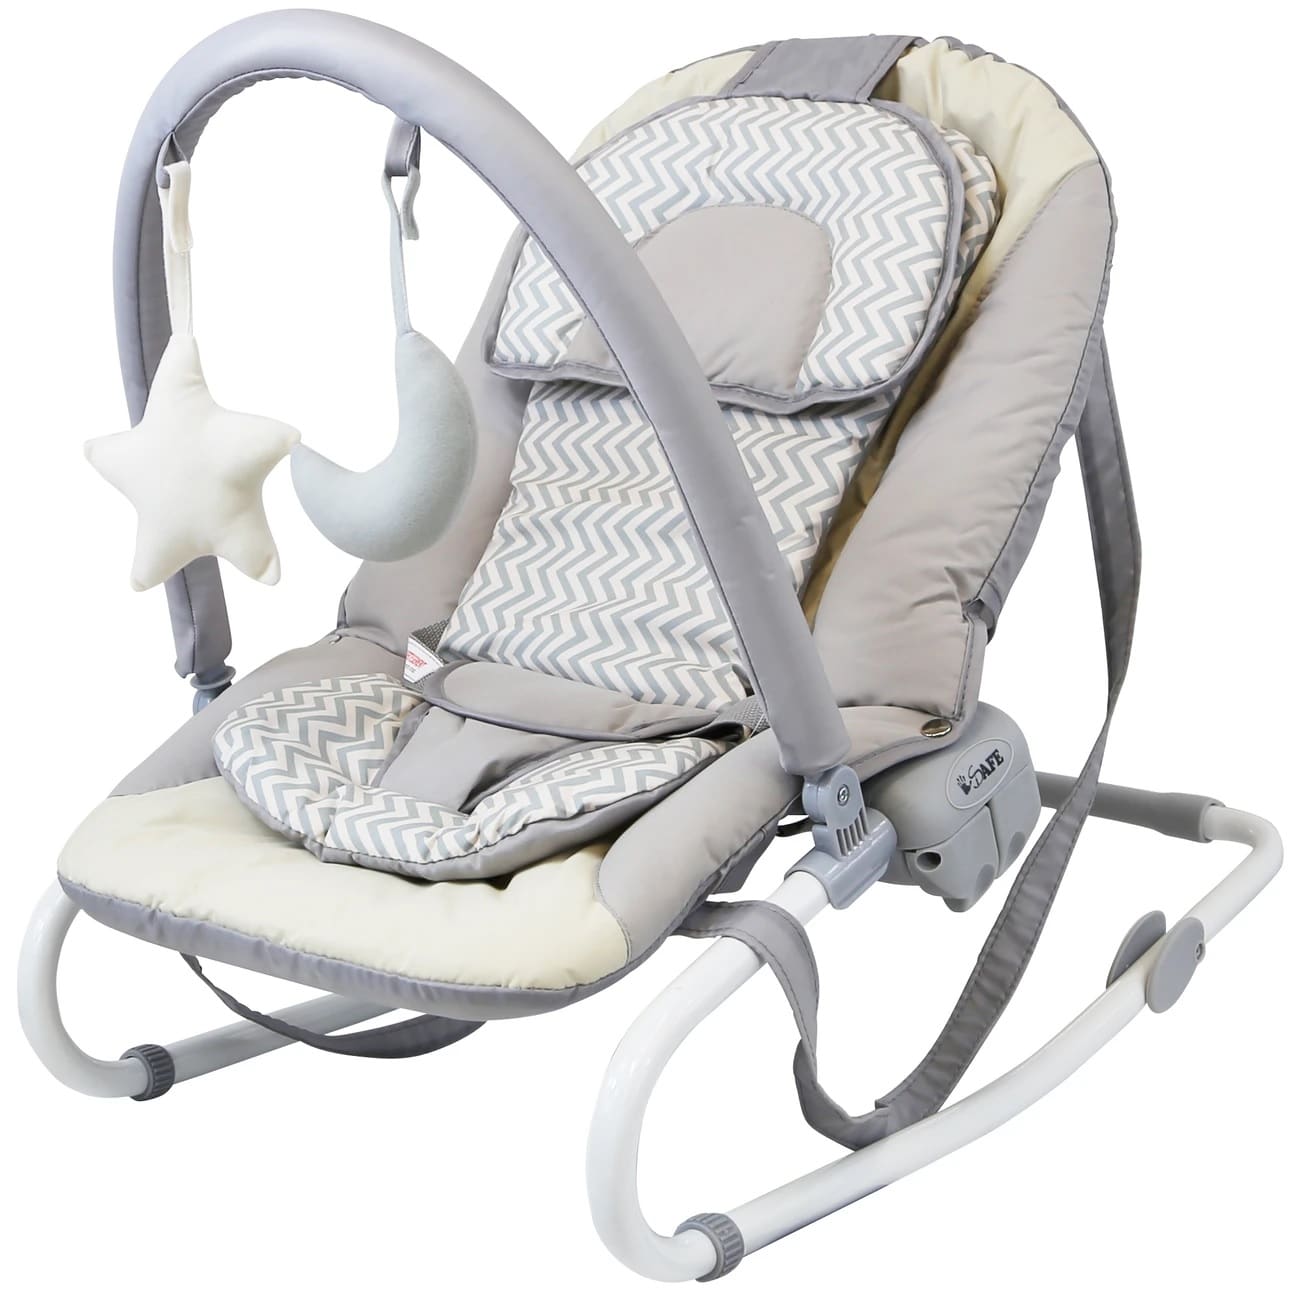 iSafe Baby Bouncer Rocker Feeding Relaxing Chair - Chevron - Baby and